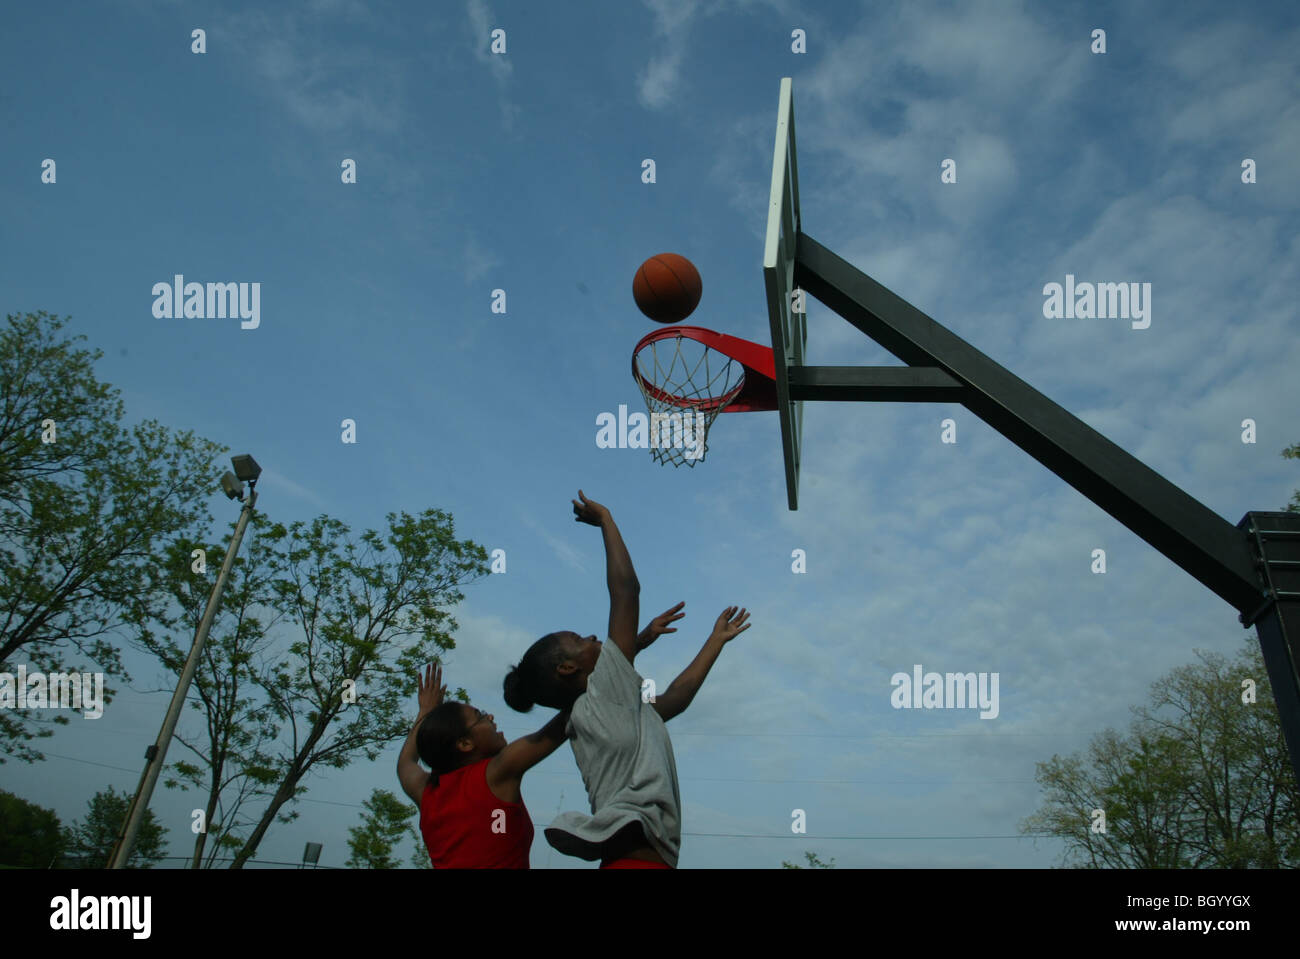 Rikeena Byrd goes for a shot during a game of pickup basketball at Crestmont section 8 housing which is in one of the poorest se Stock Photo